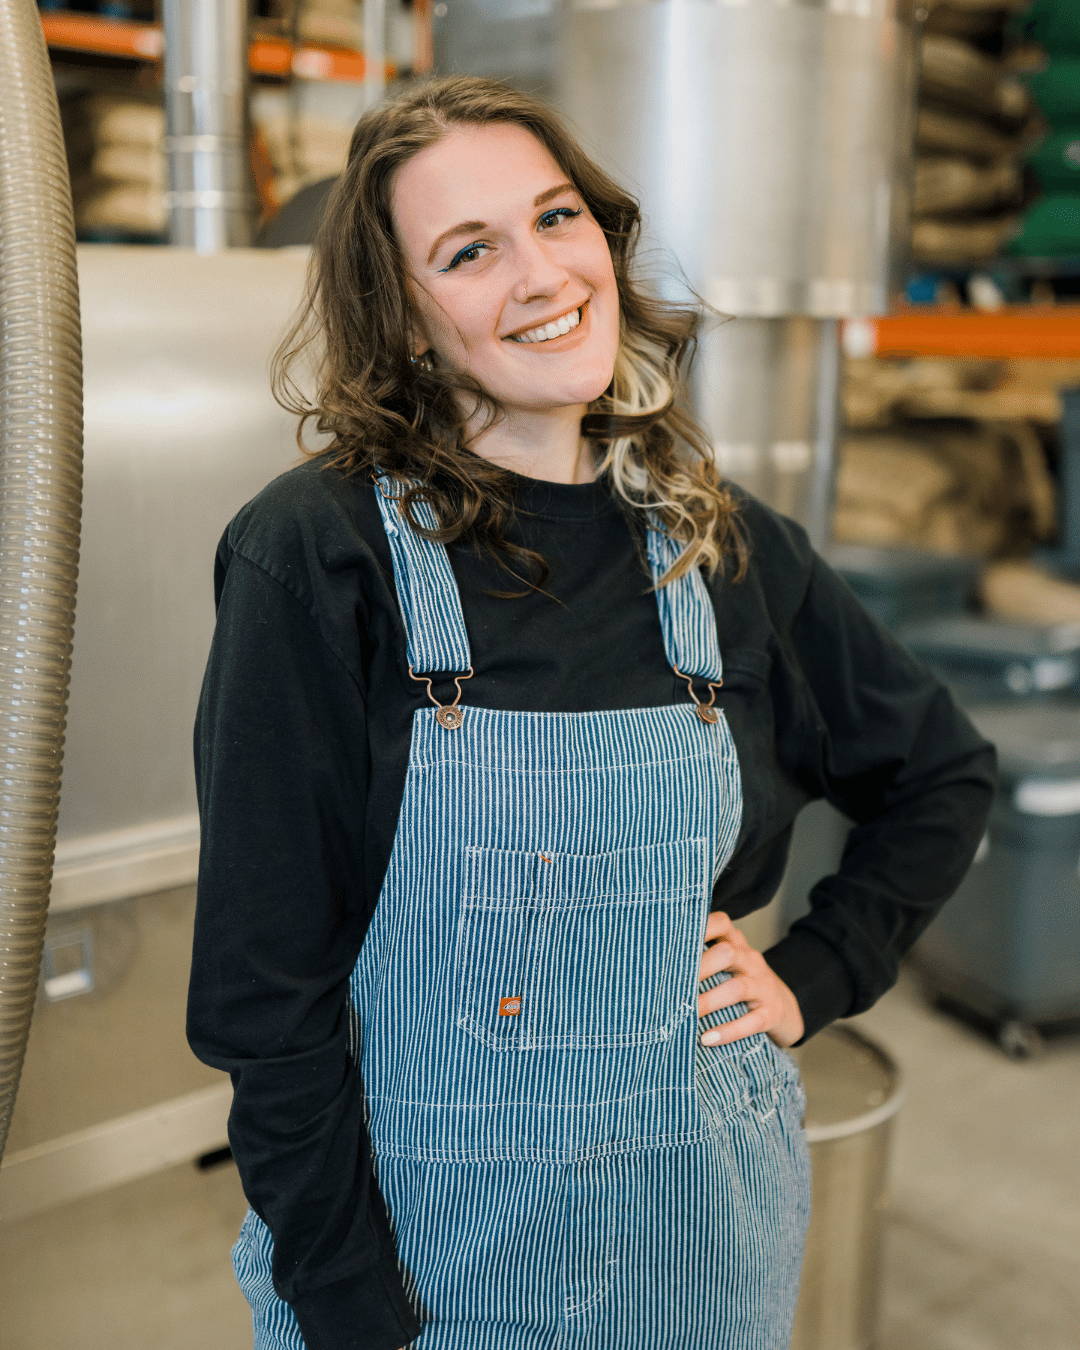 Woman with overalls smiling. 